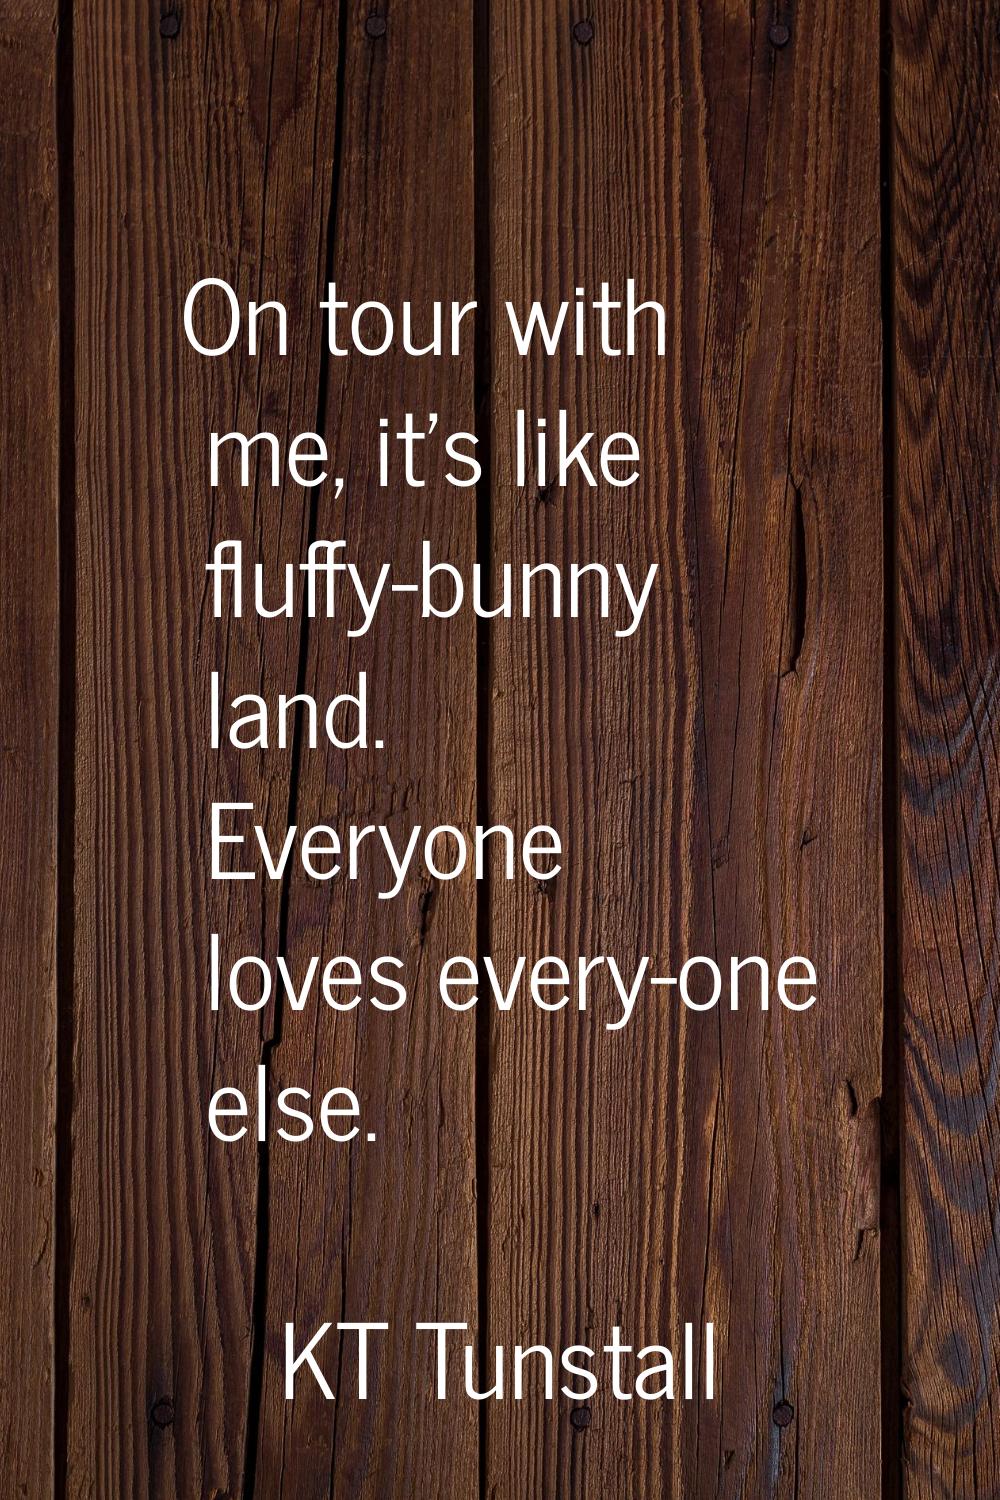 On tour with me, it's like fluffy-bunny land. Everyone loves every-one else.